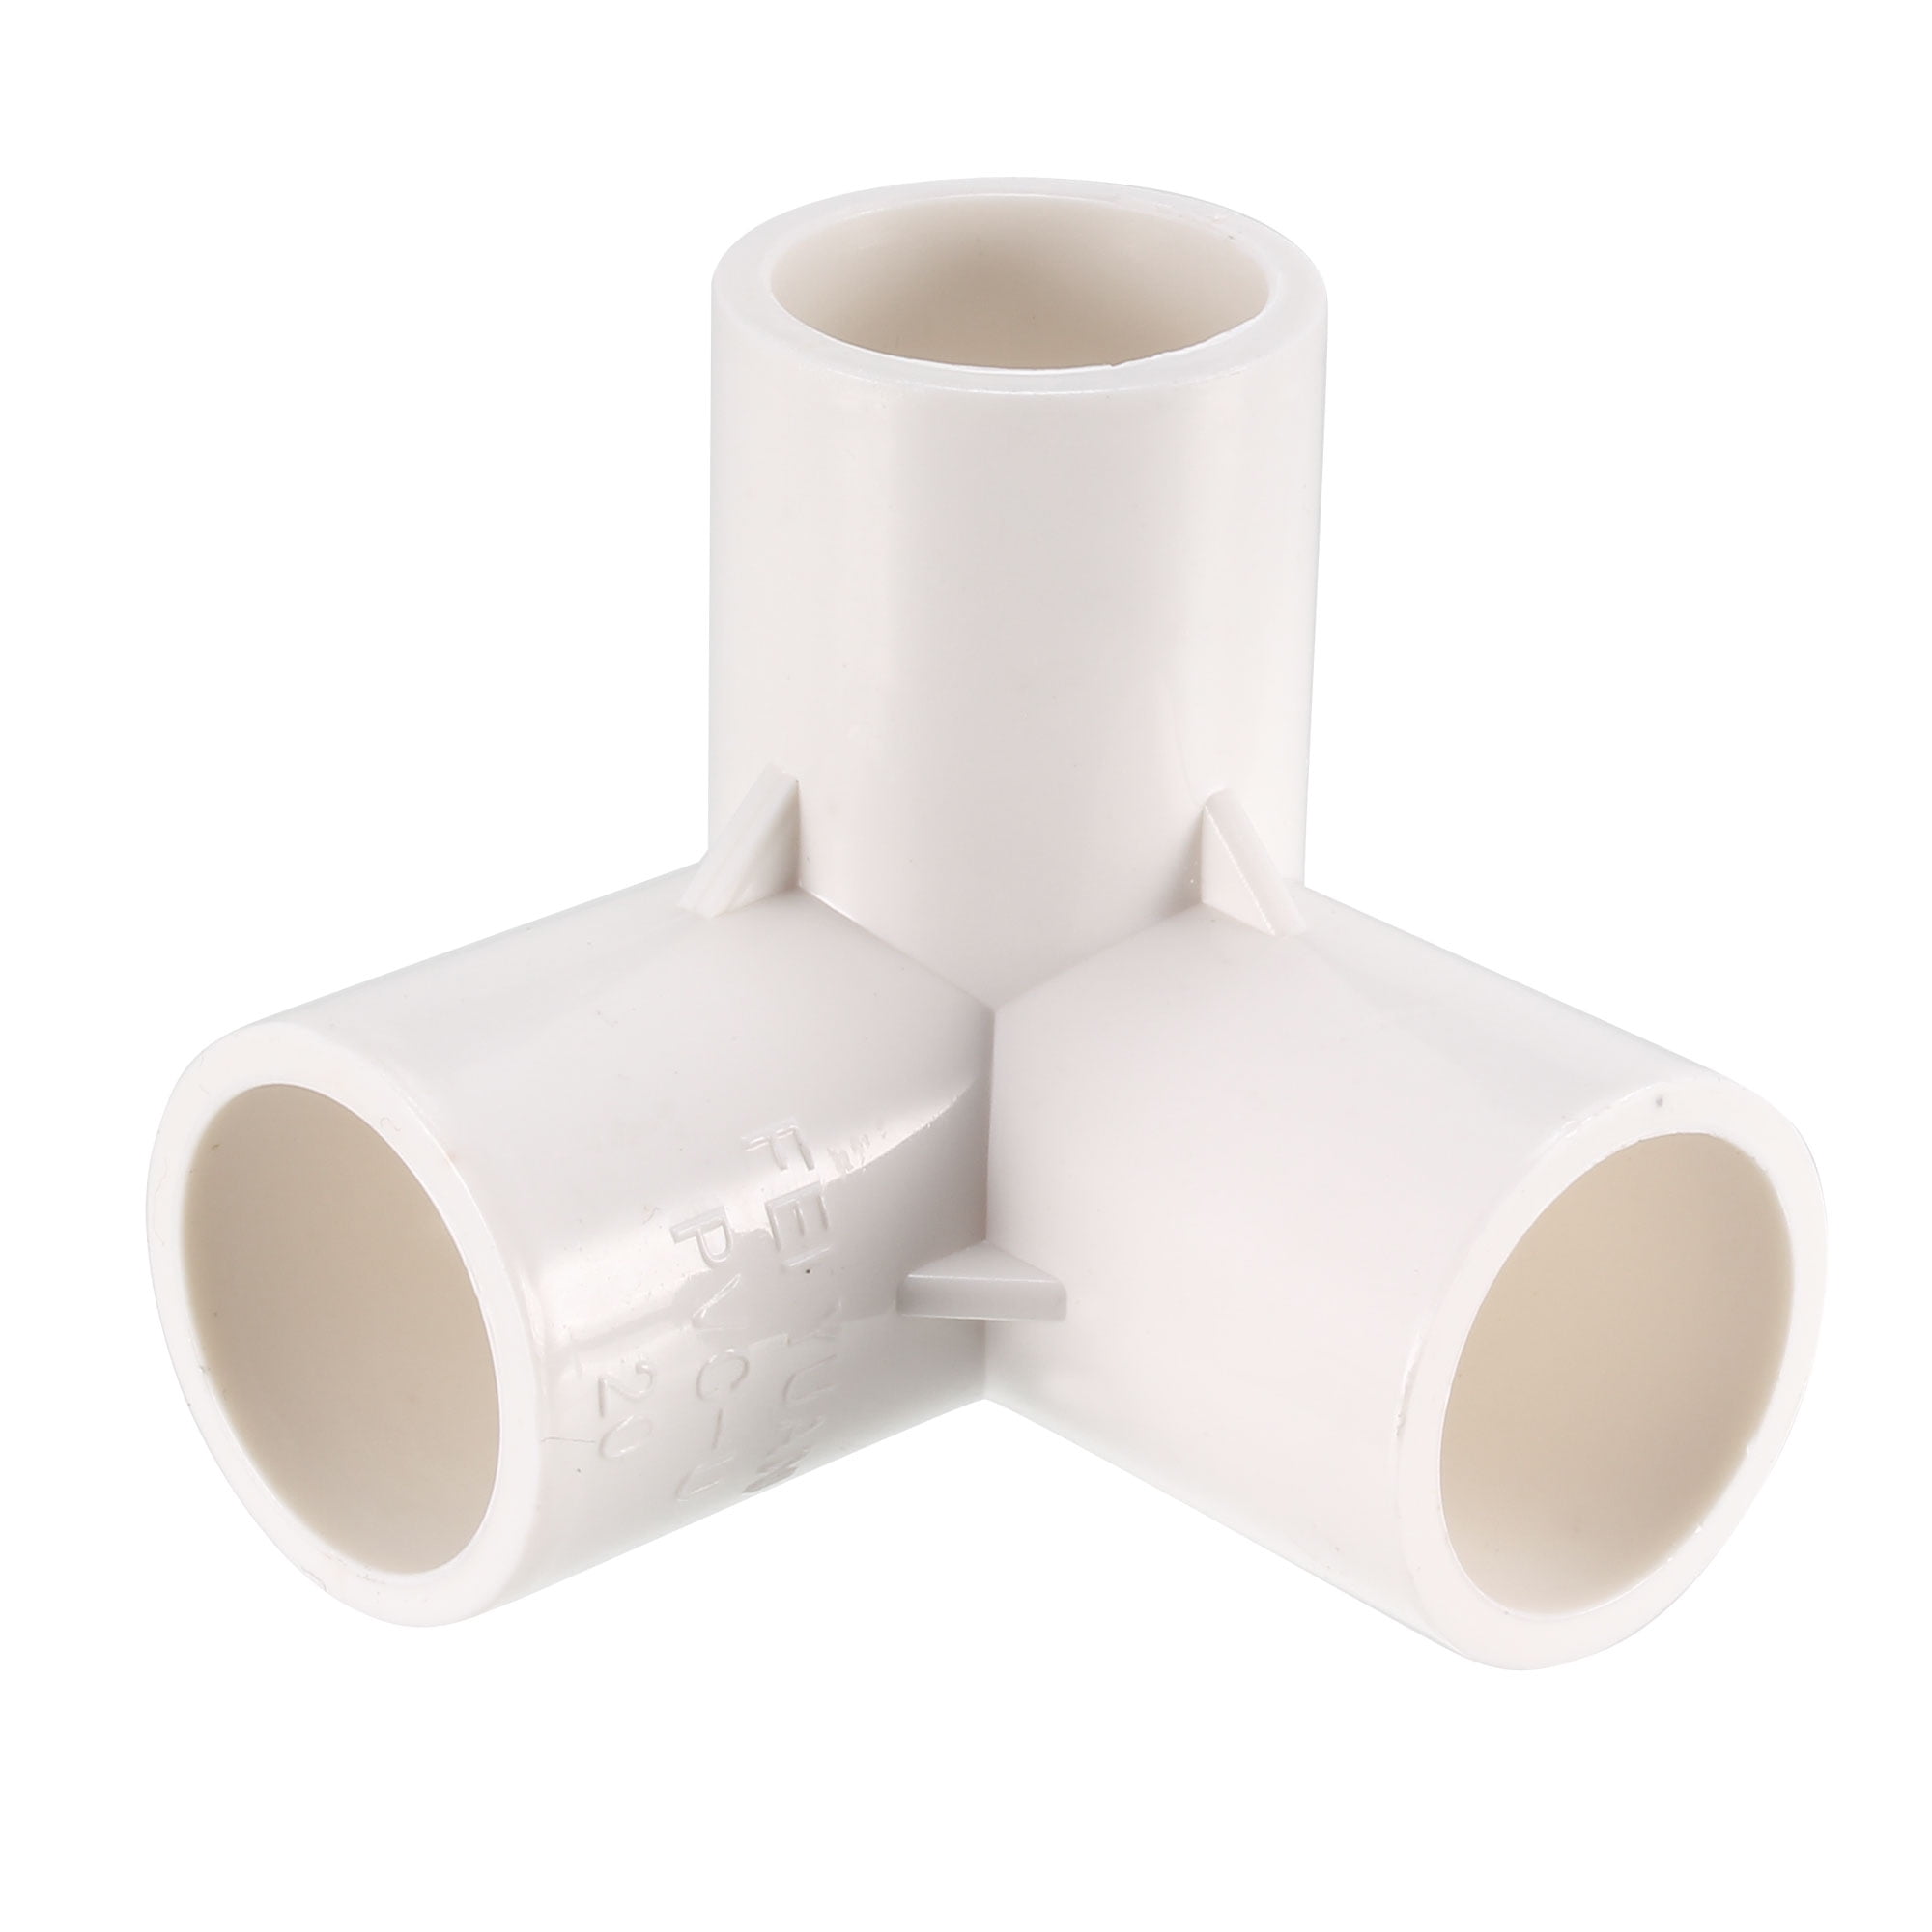 3 Way Elbow PVC Pipe Fitting,Furniture Grade,1/2inch Size Tee Corner